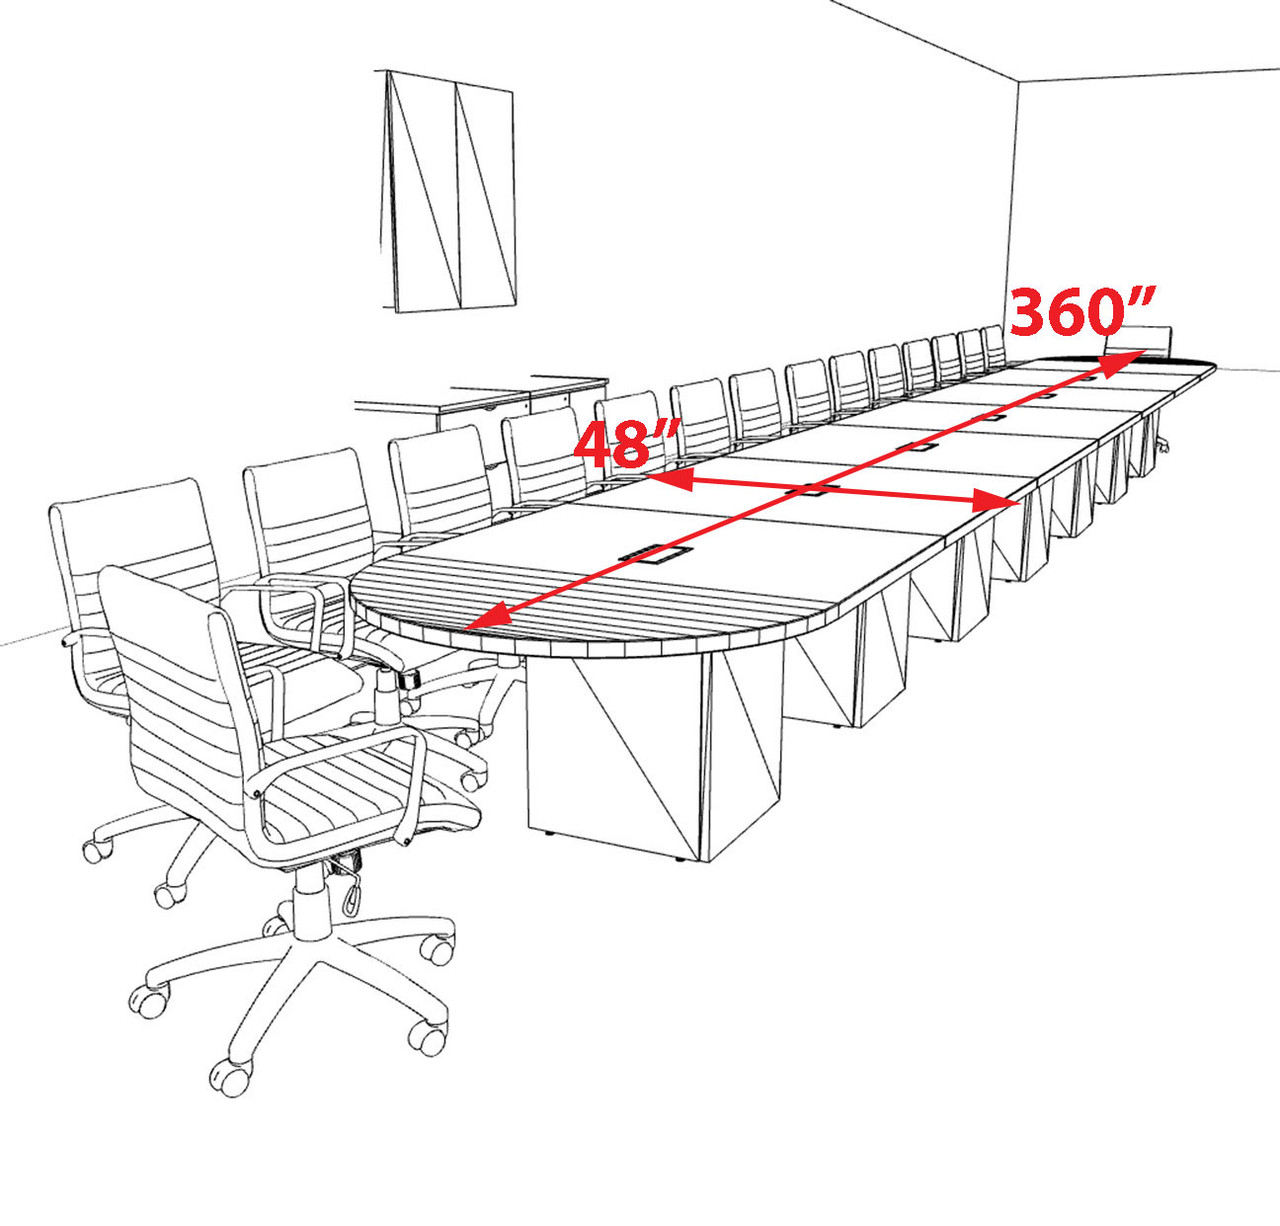 Modern Racetrack 30' Feet Conference Table, #OF-CON-CRQ81